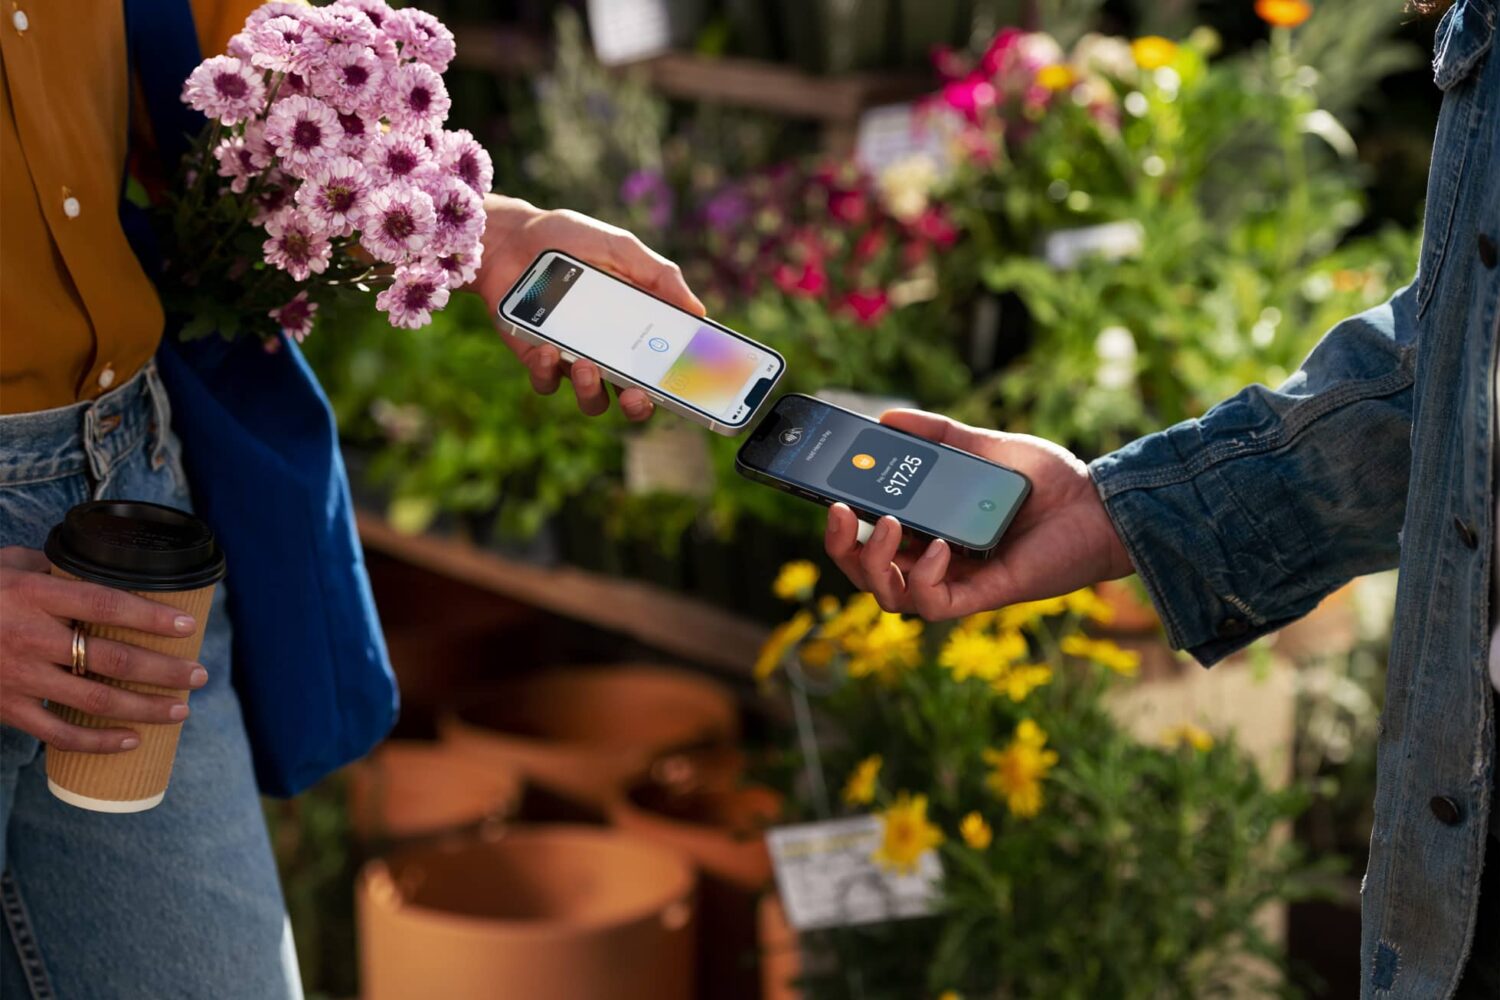 Apple's marketing image showing two young women tapping the top of their iPhones to use the Tap to Pay NFC contactless payments feature in Apple Pay